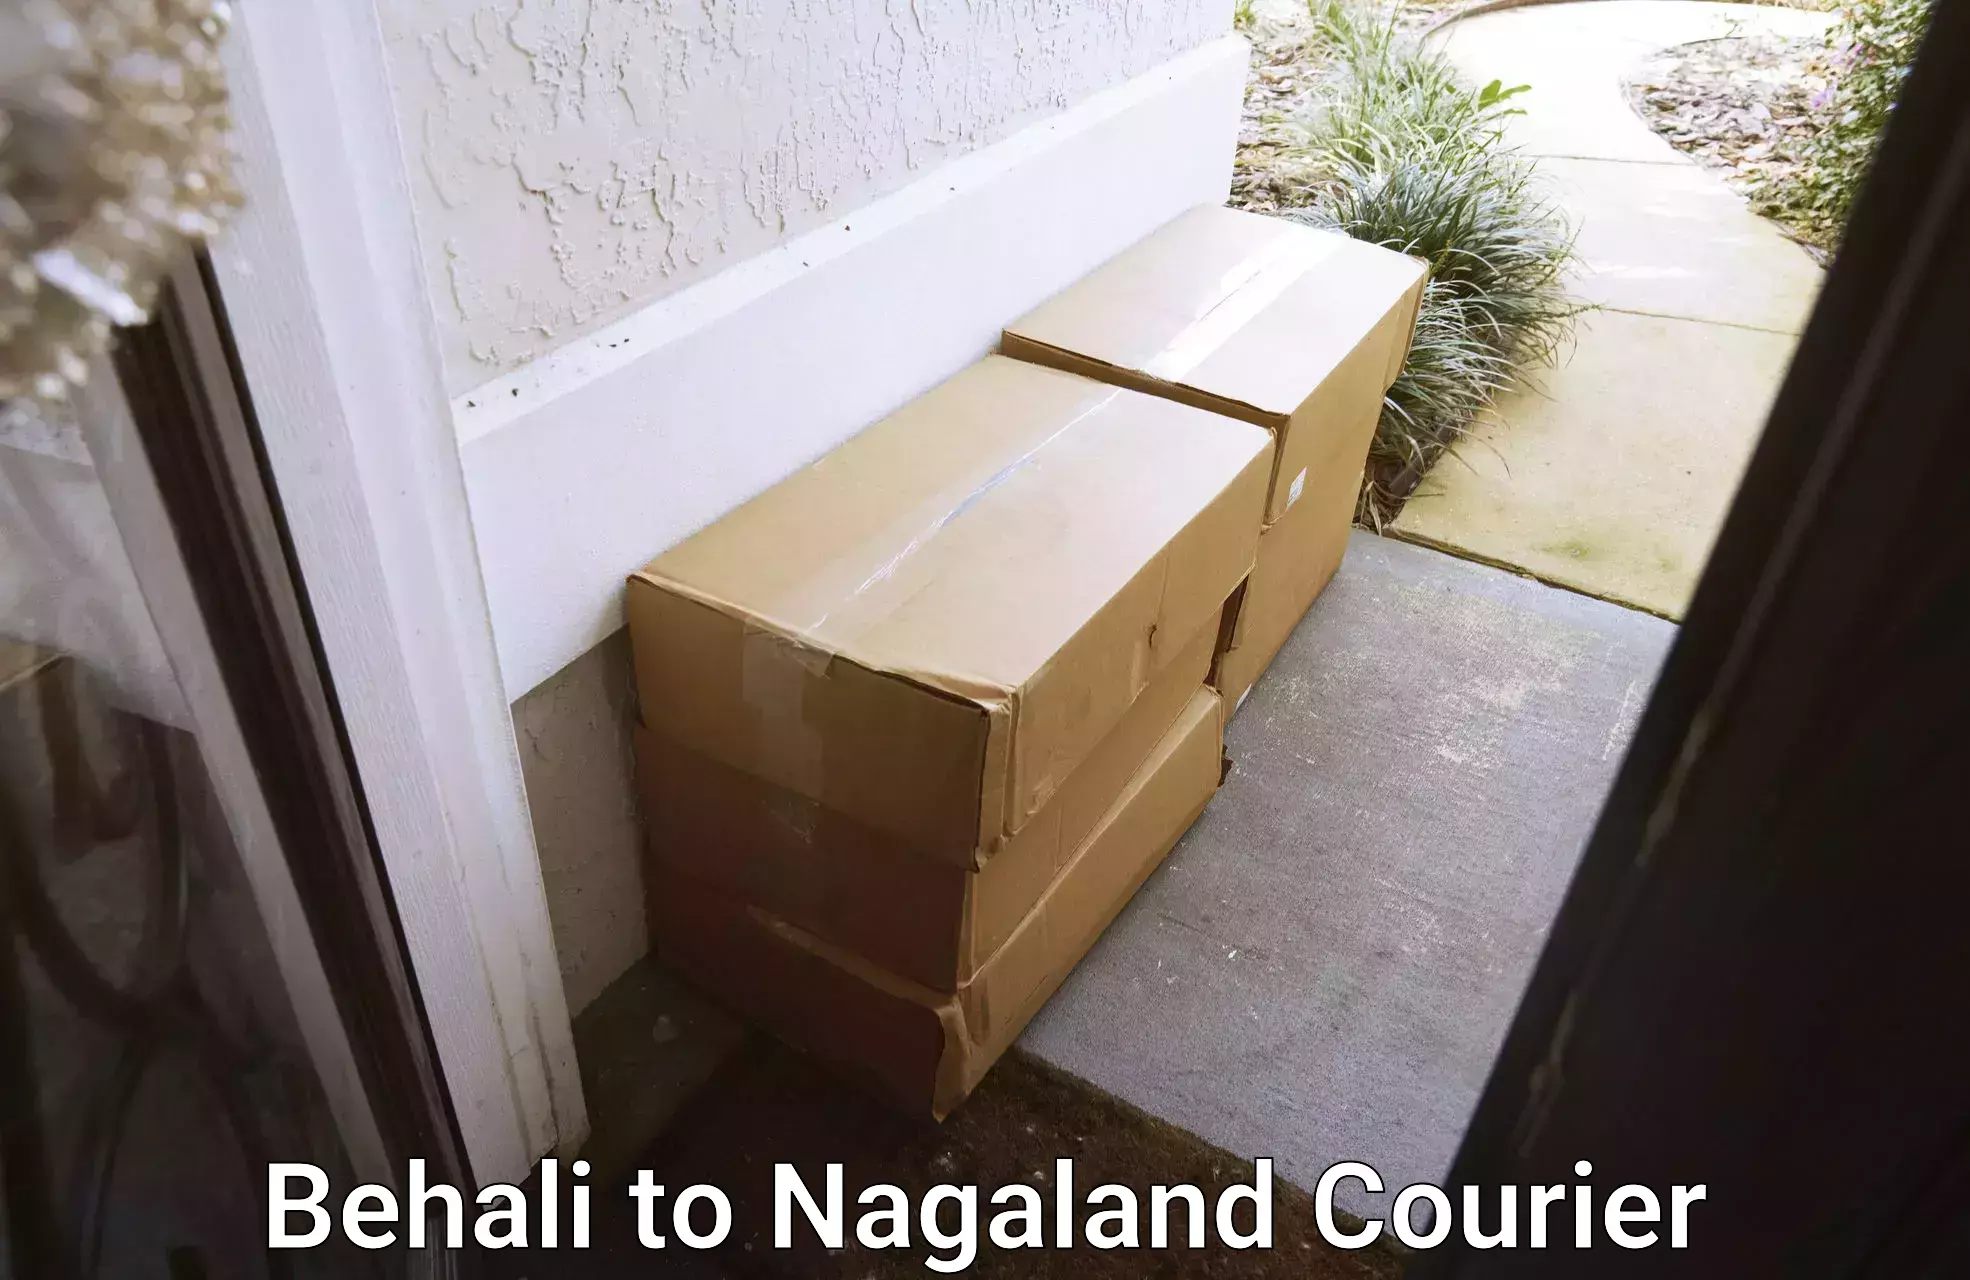 Custom courier packaging in Behali to Nagaland